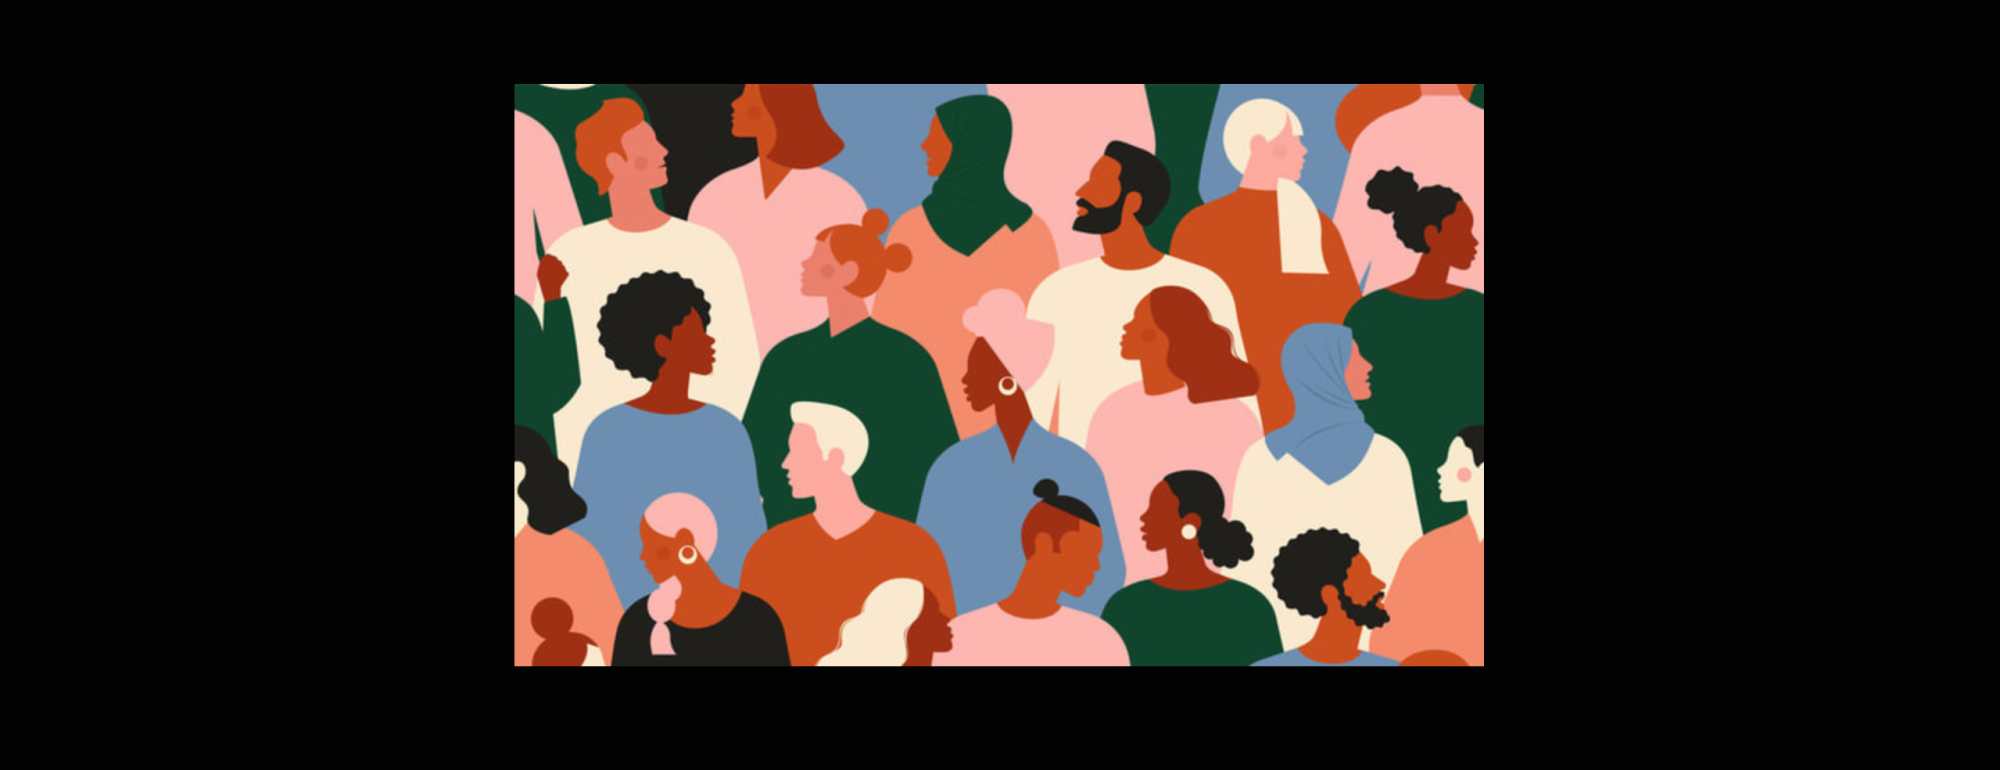 a cartoonic image of people with diverse ethnicities/colors  